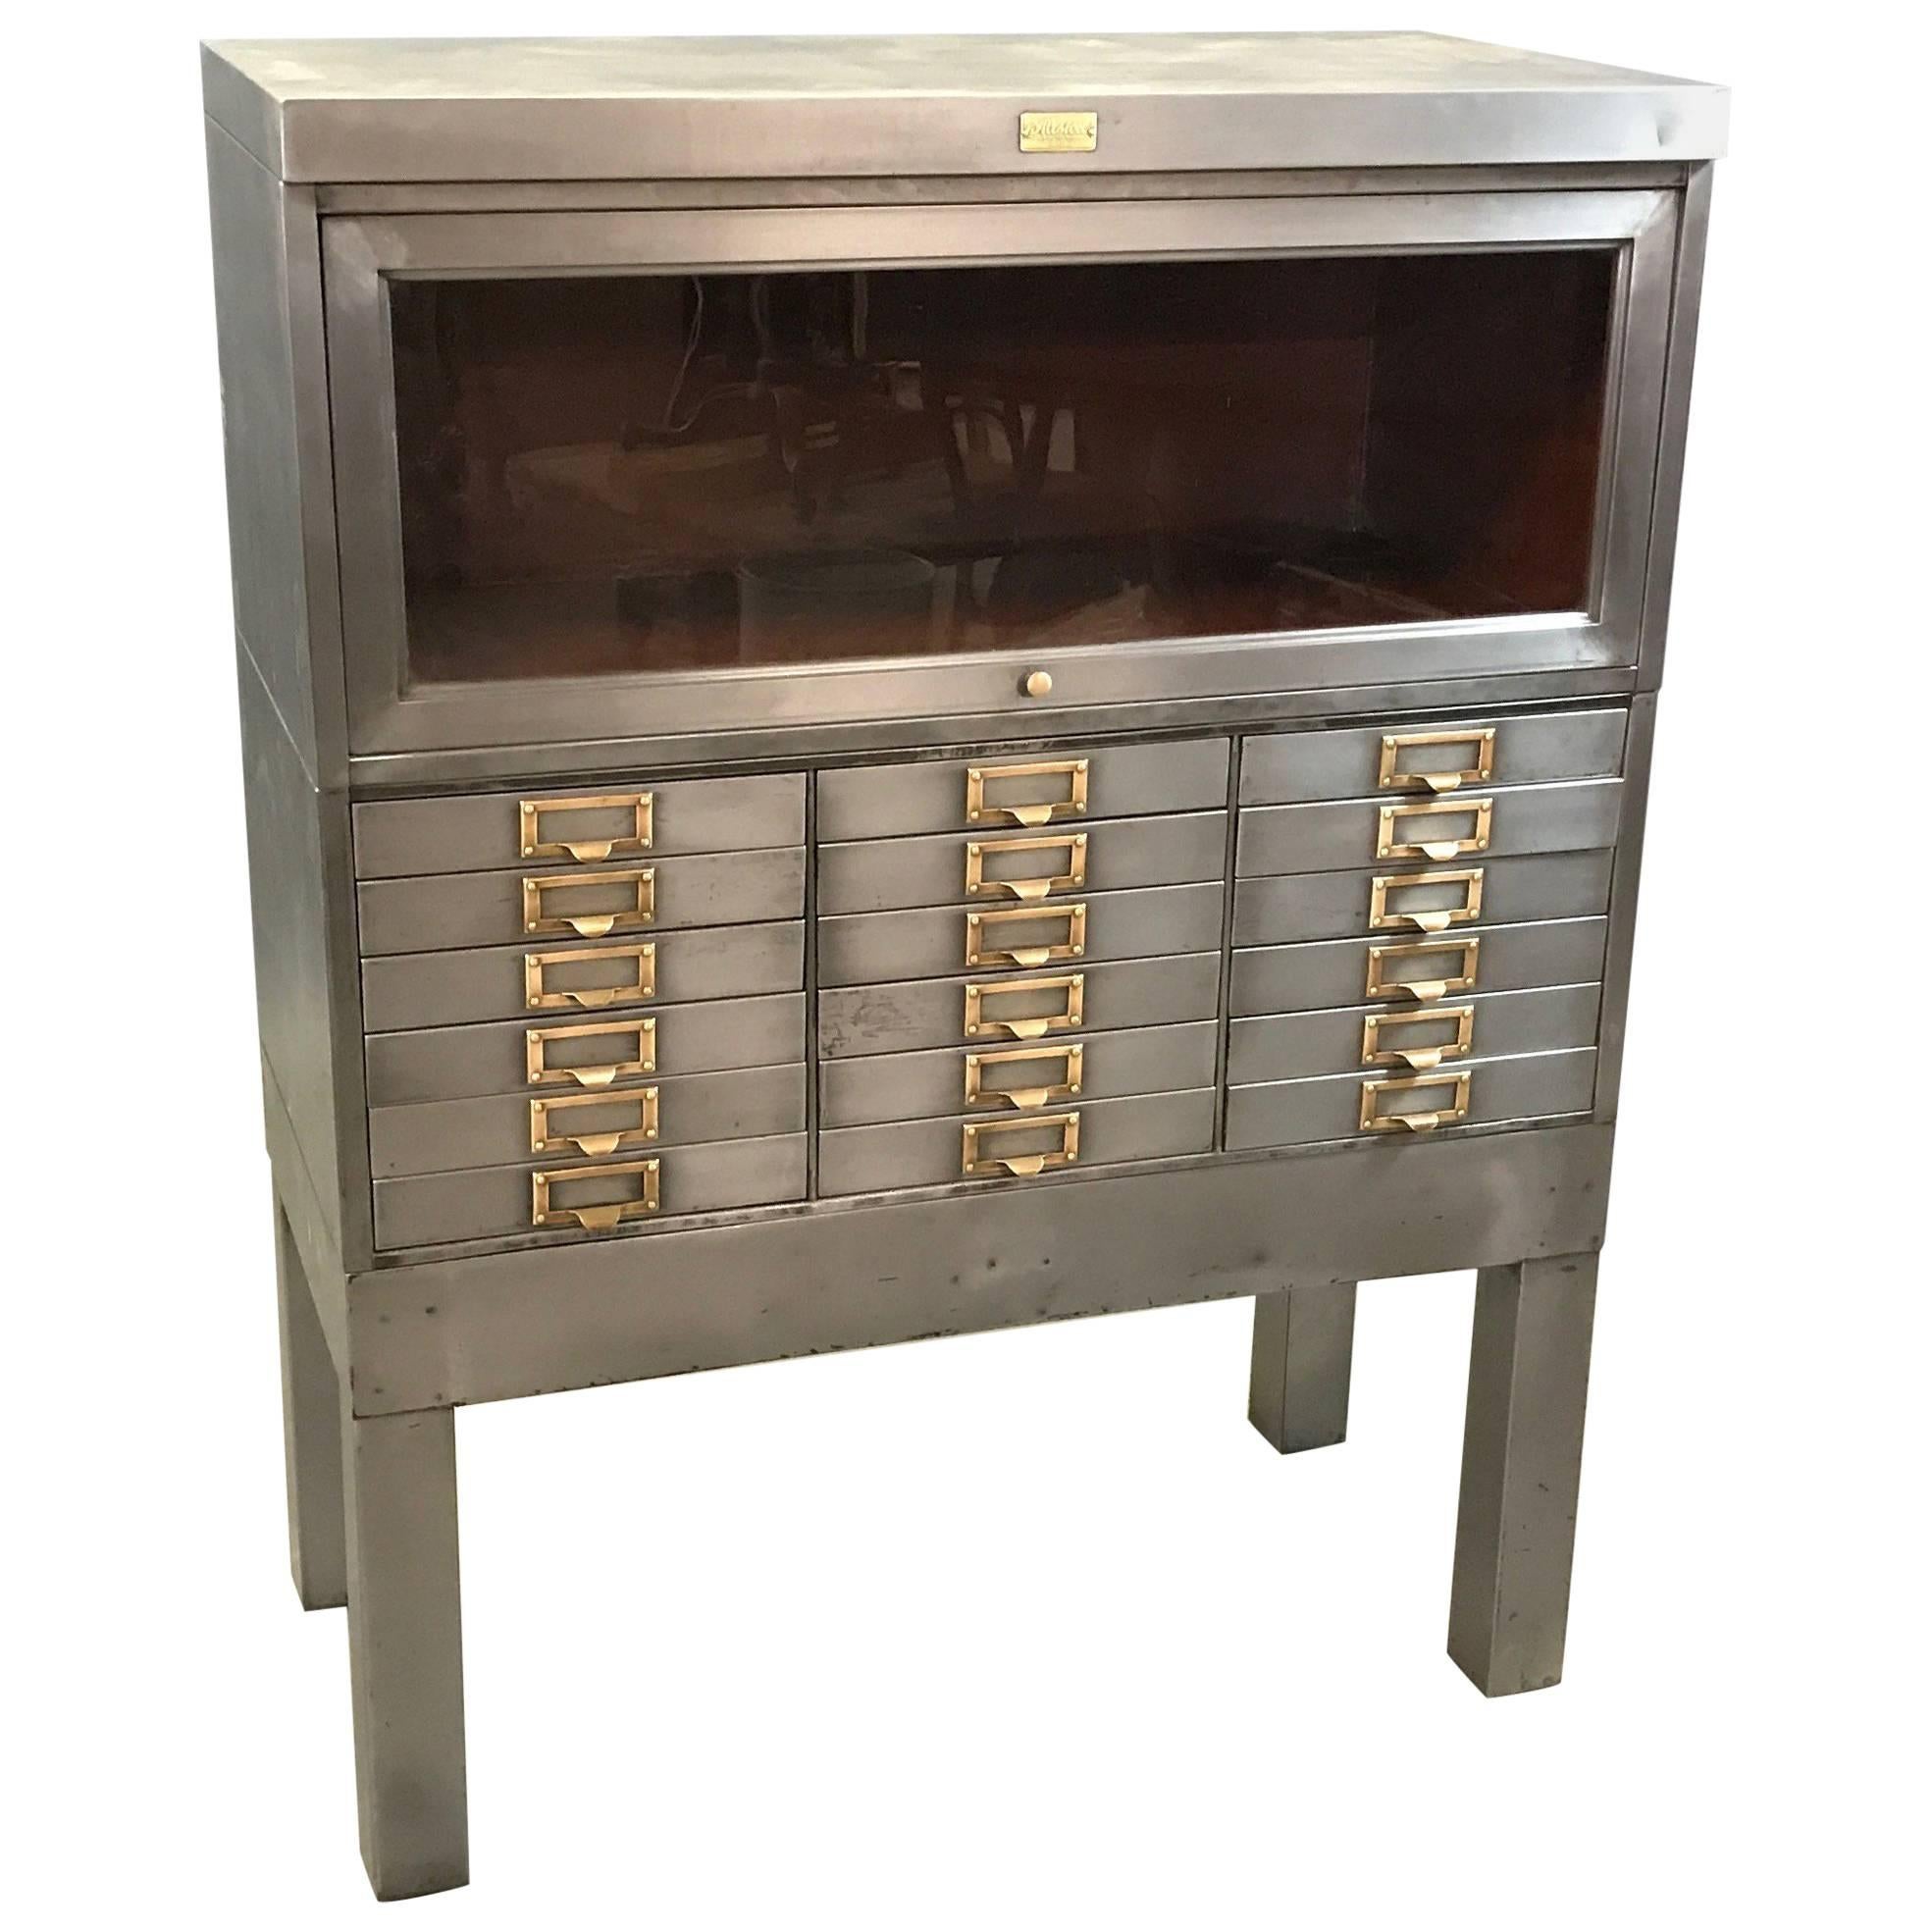 Industrial Brushed Steel Document Cabinet by Allsteel